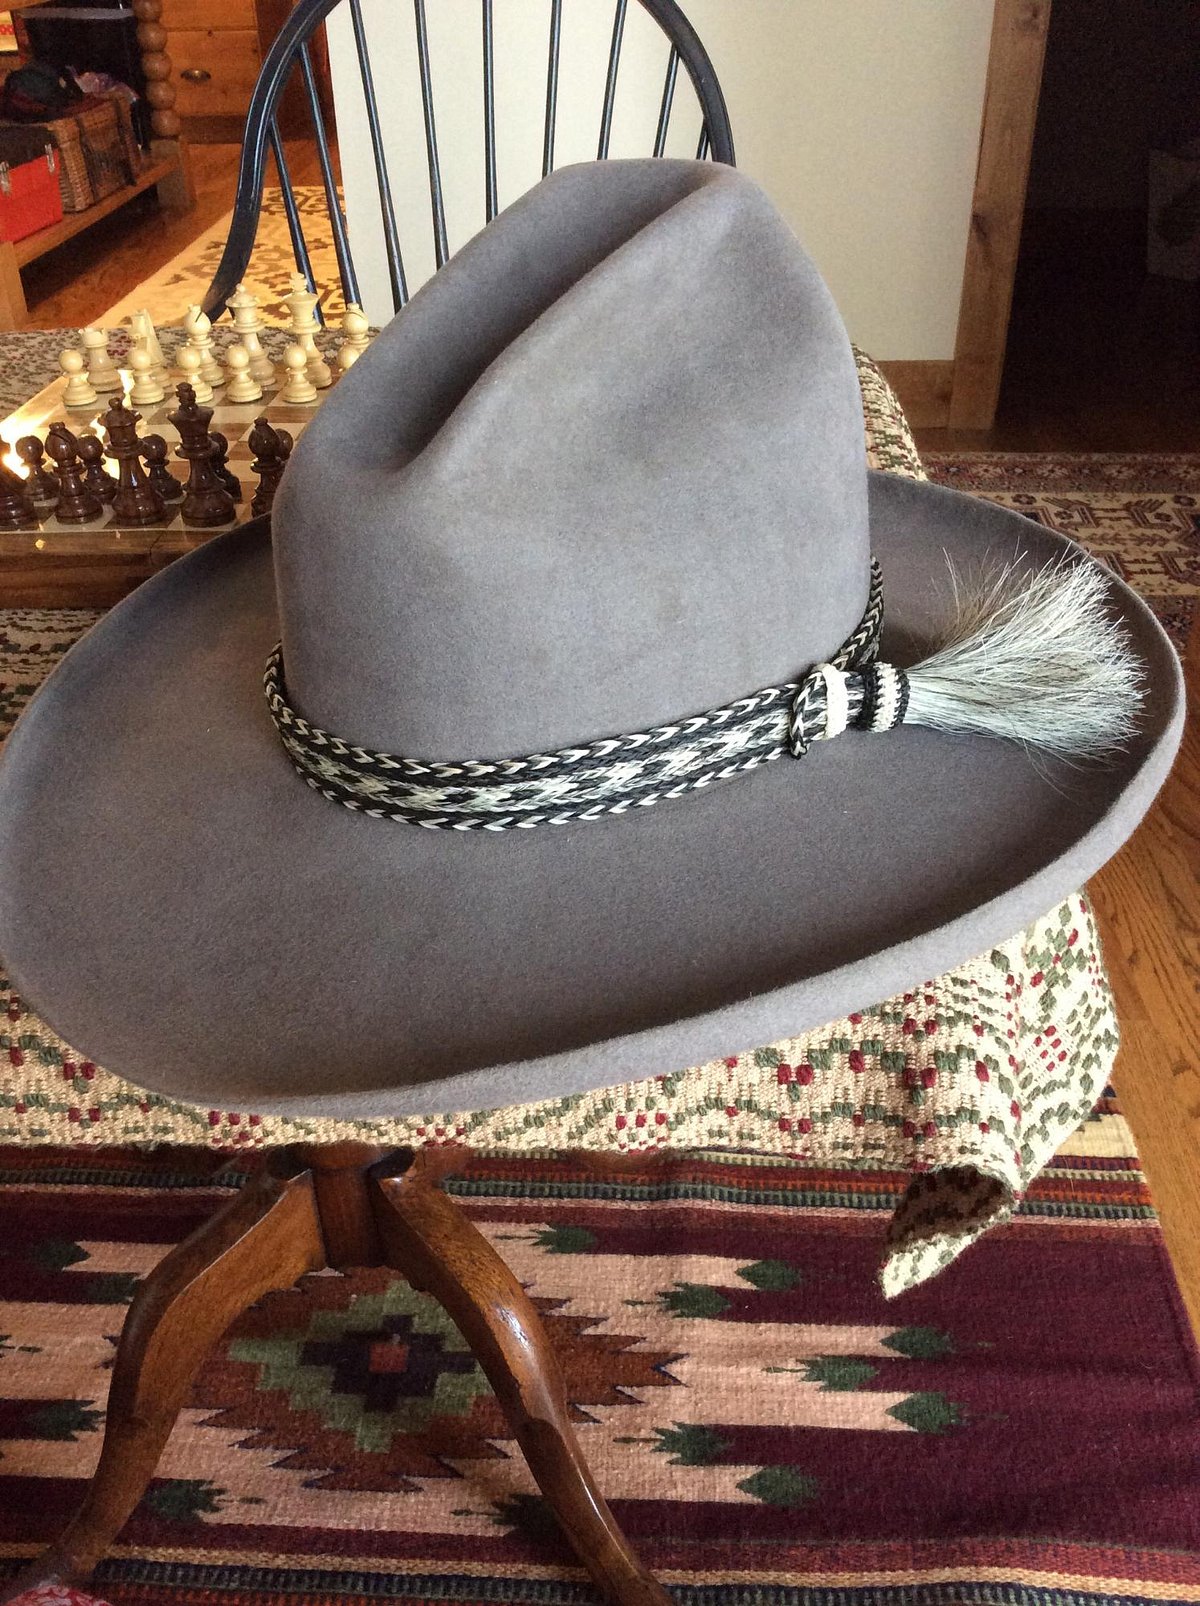 Crystal Springs resident makes western-style felt hats for customers